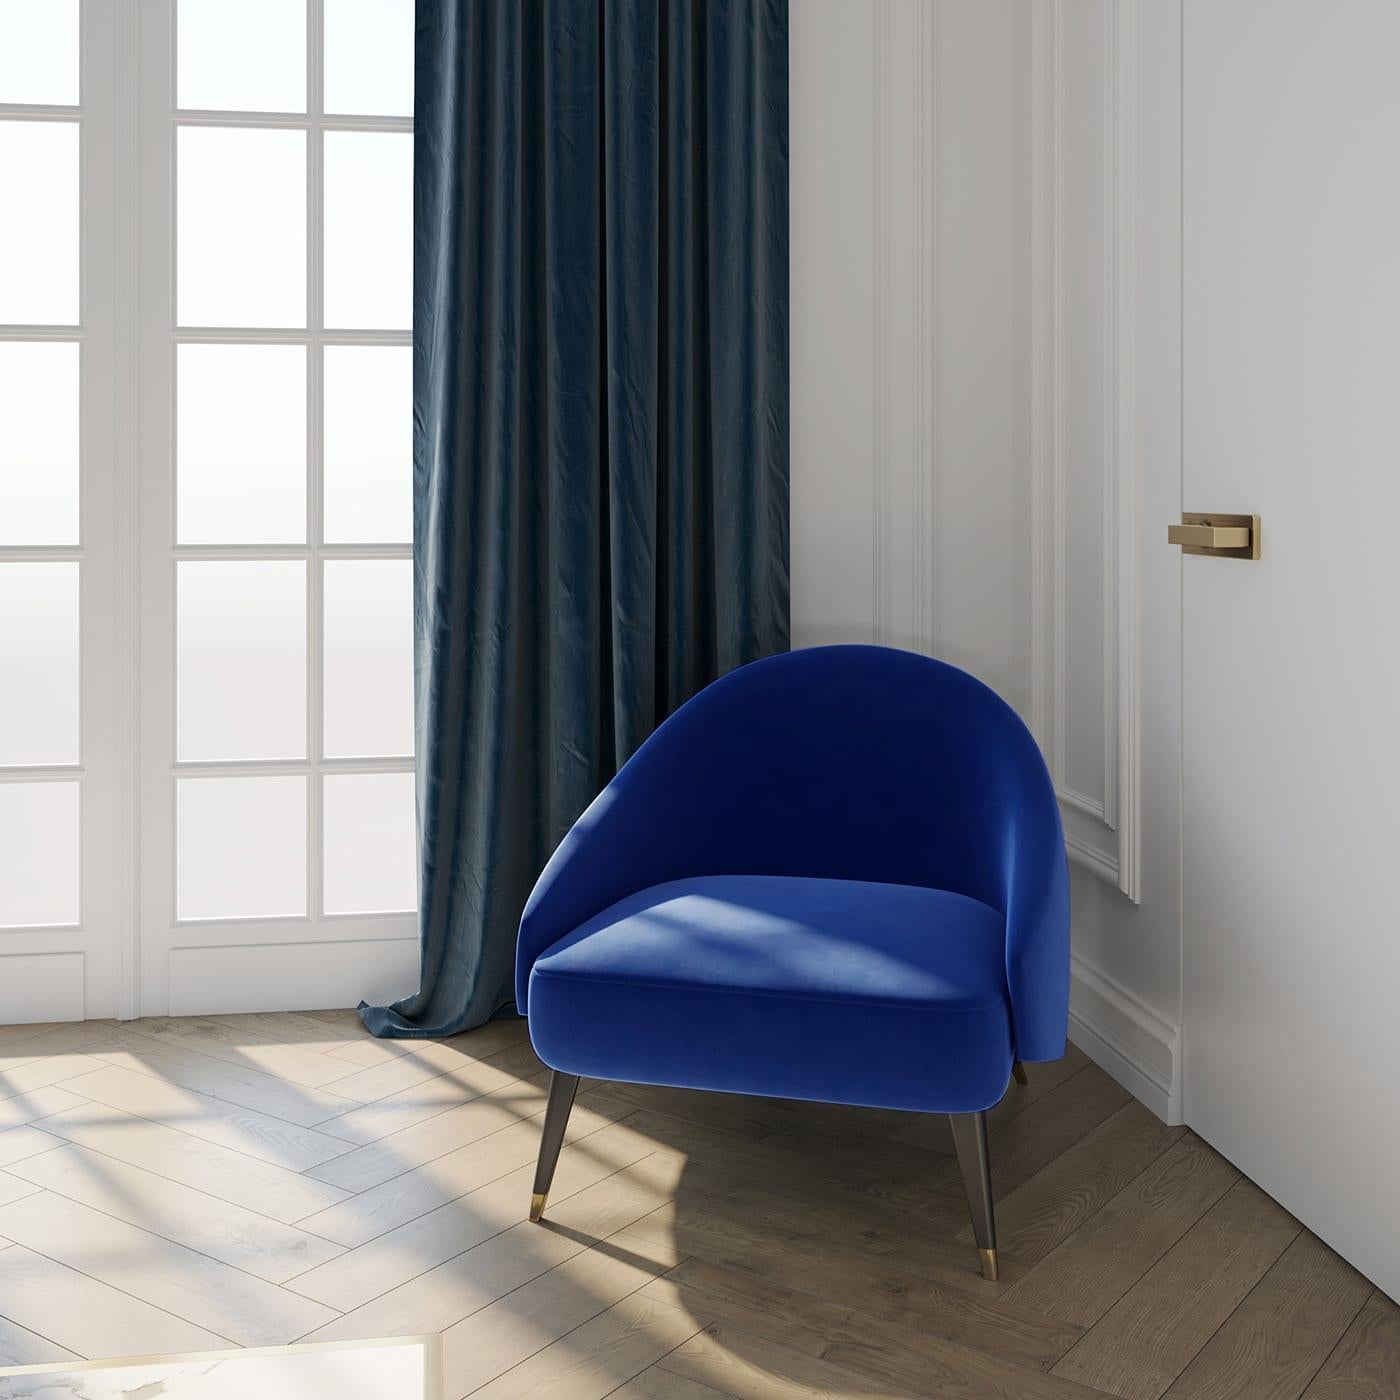 Hand-Crafted Minerva Blue armchair